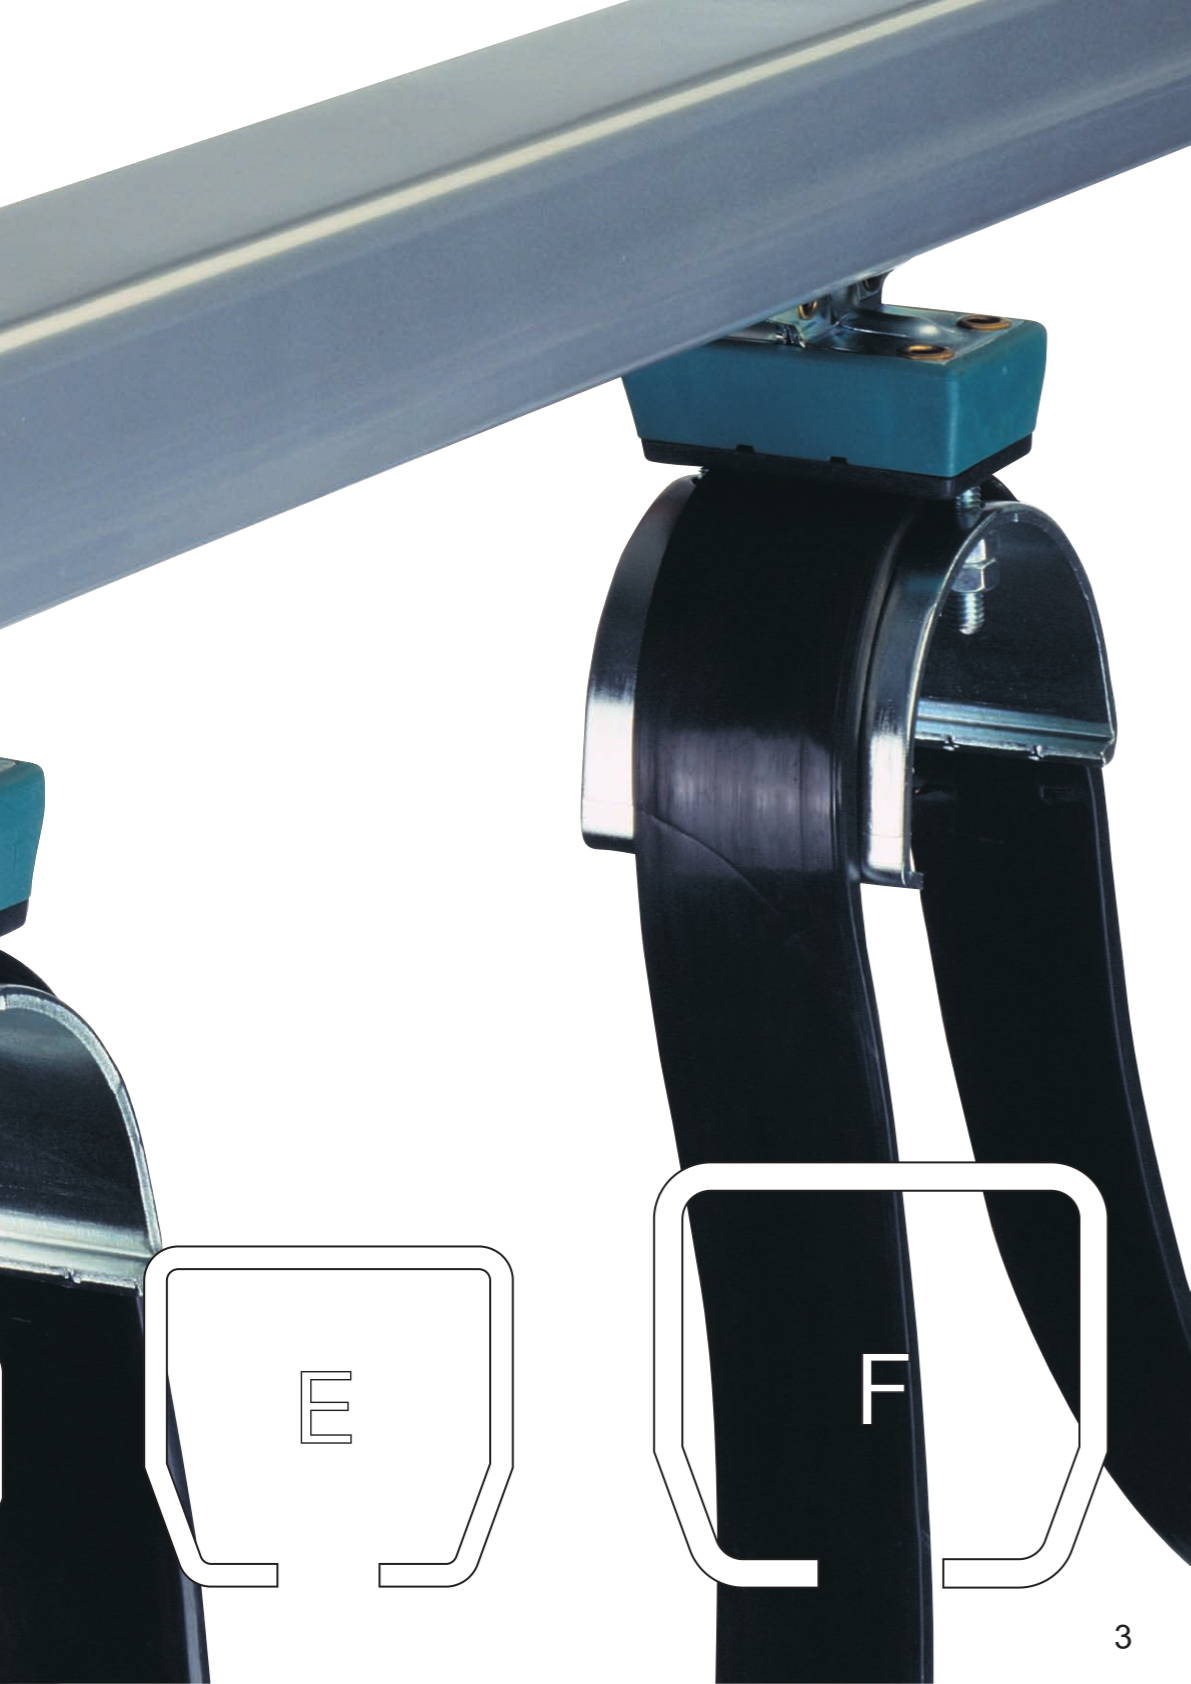 Festoon Cable System F product catalogue - page 03